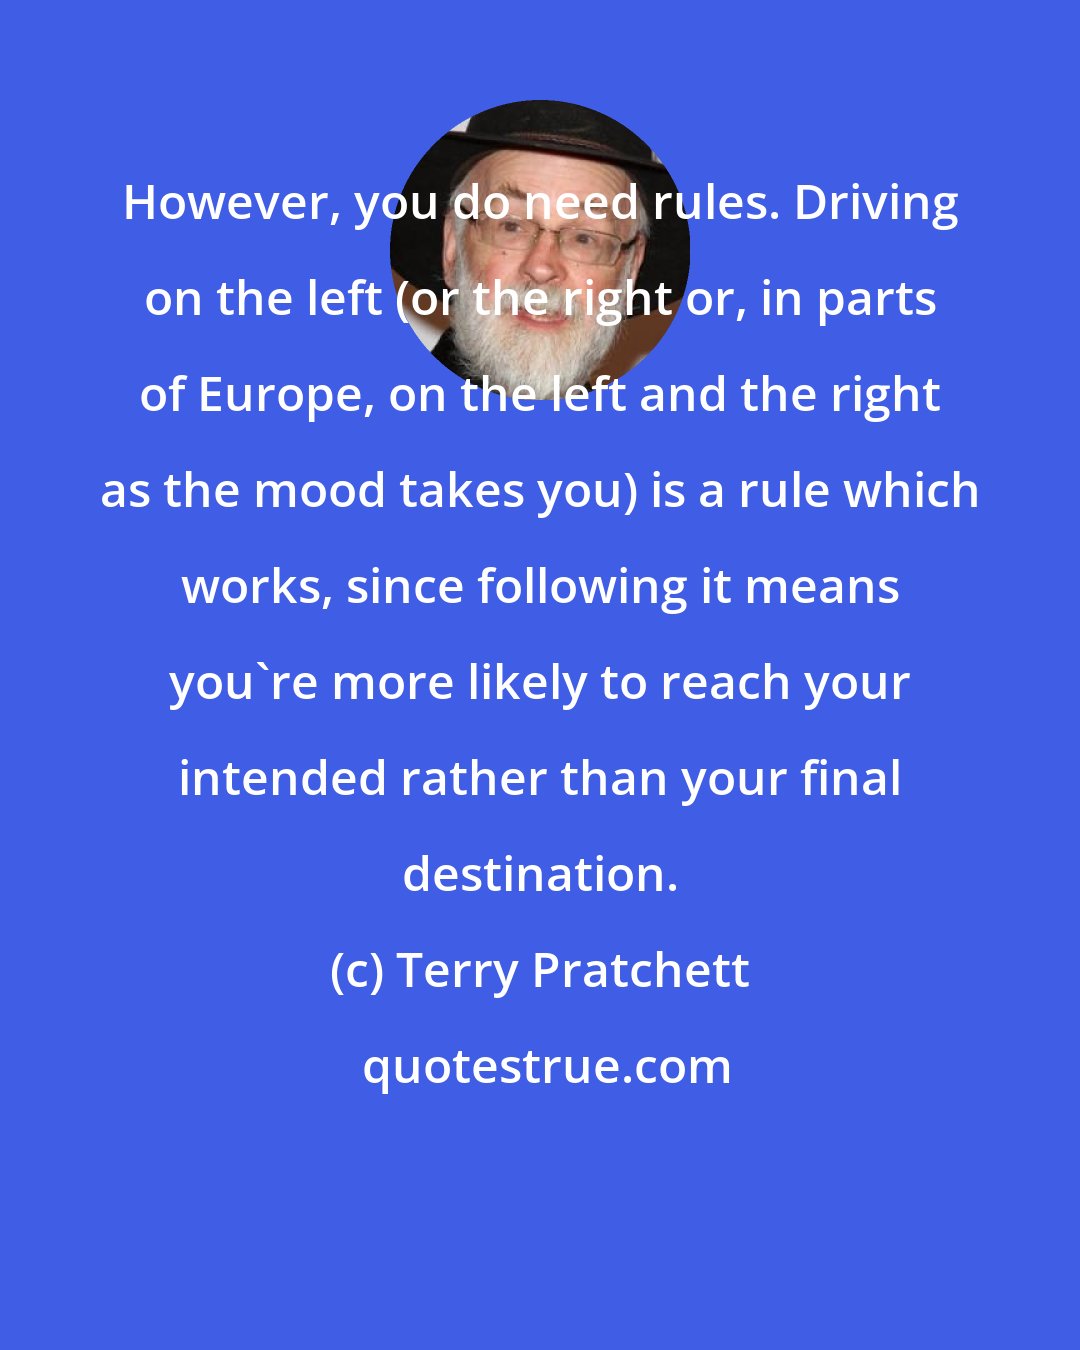 Terry Pratchett: However, you do need rules. Driving on the left (or the right or, in parts of Europe, on the left and the right as the mood takes you) is a rule which works, since following it means you're more likely to reach your intended rather than your final destination.